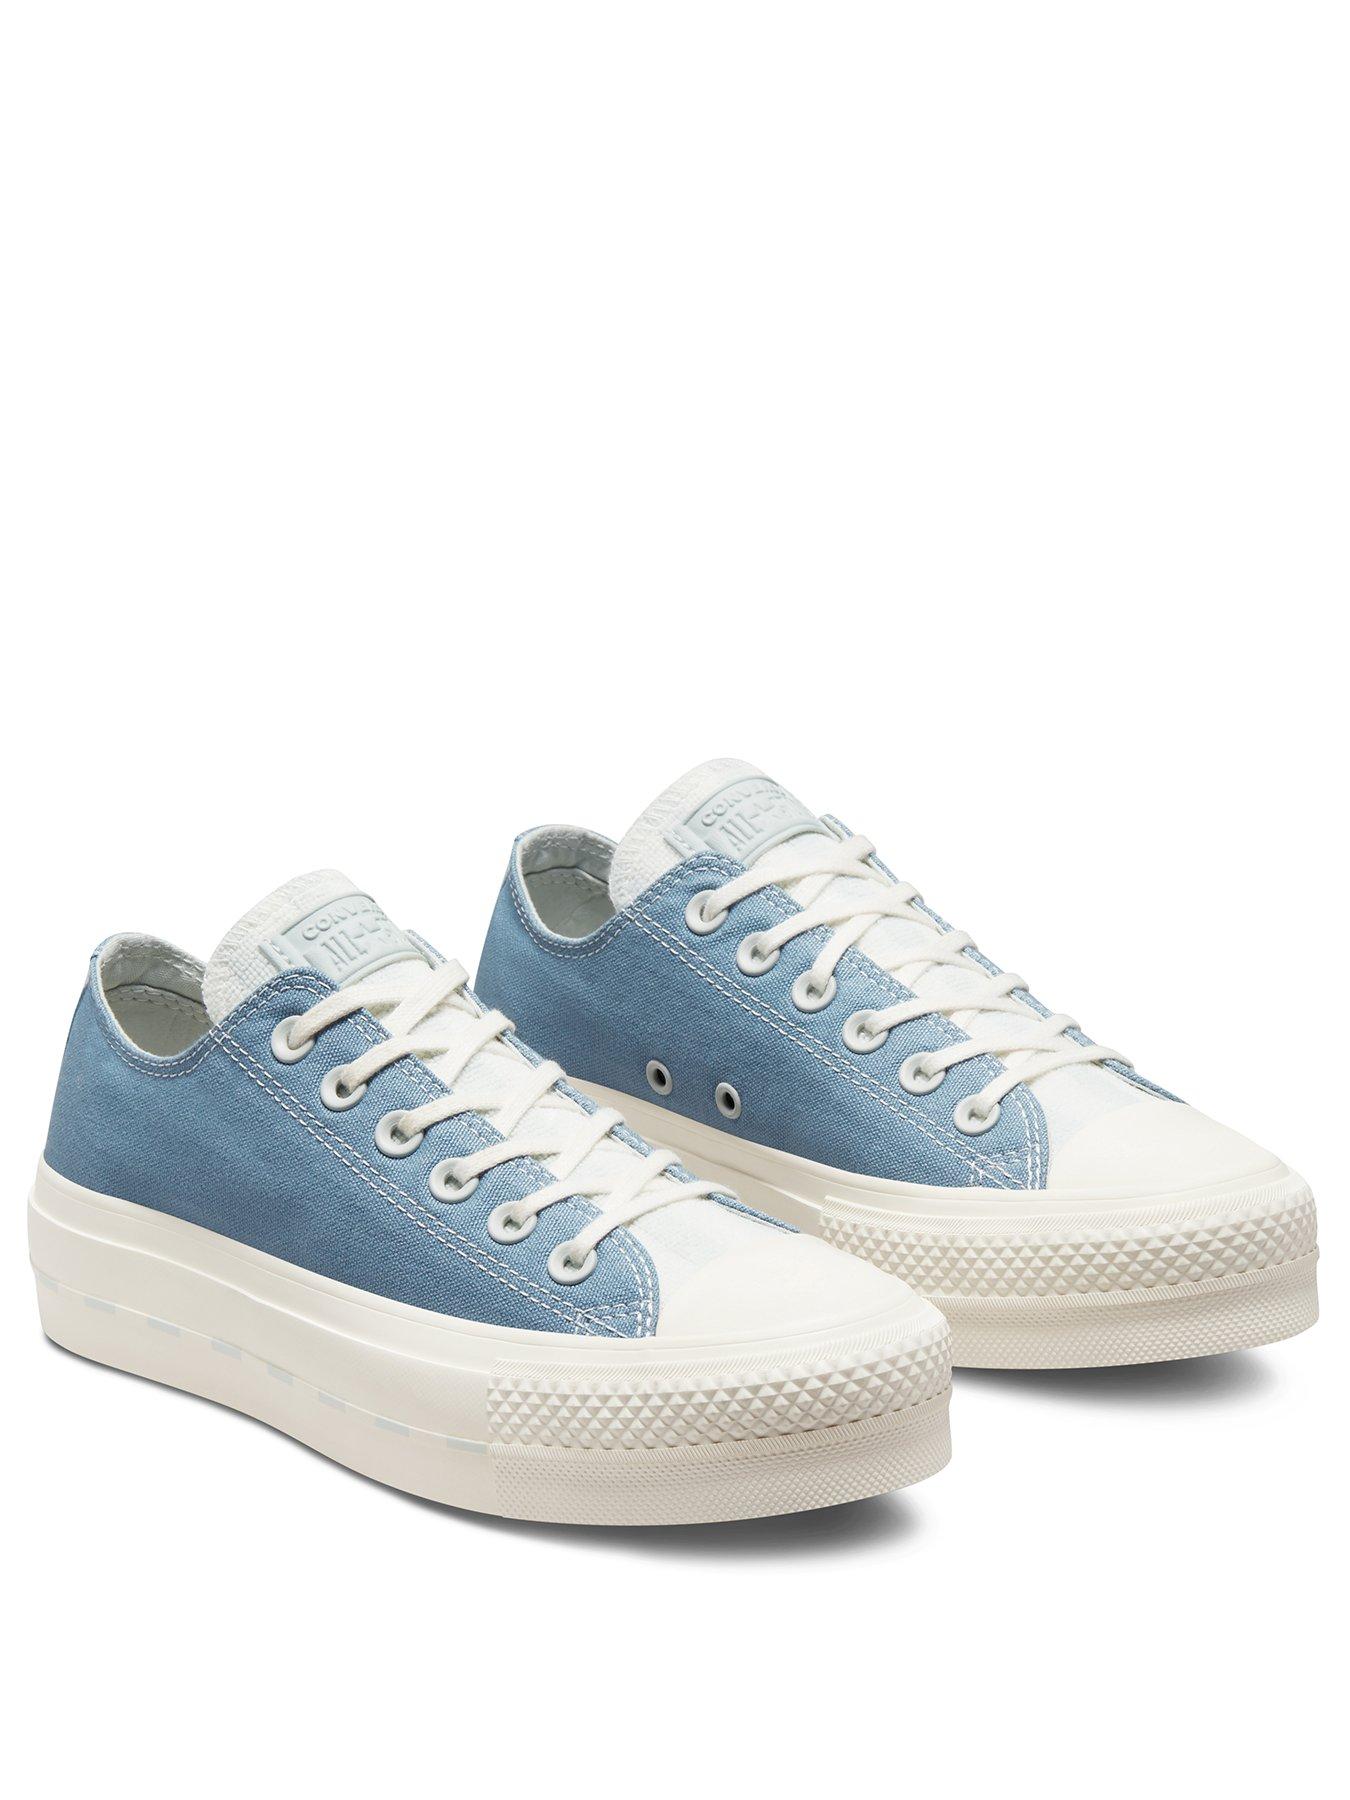 Trainers Chuck Taylor All Star Lift Crafted Canvas Platform Ox Plimsoll - Blue/Silver